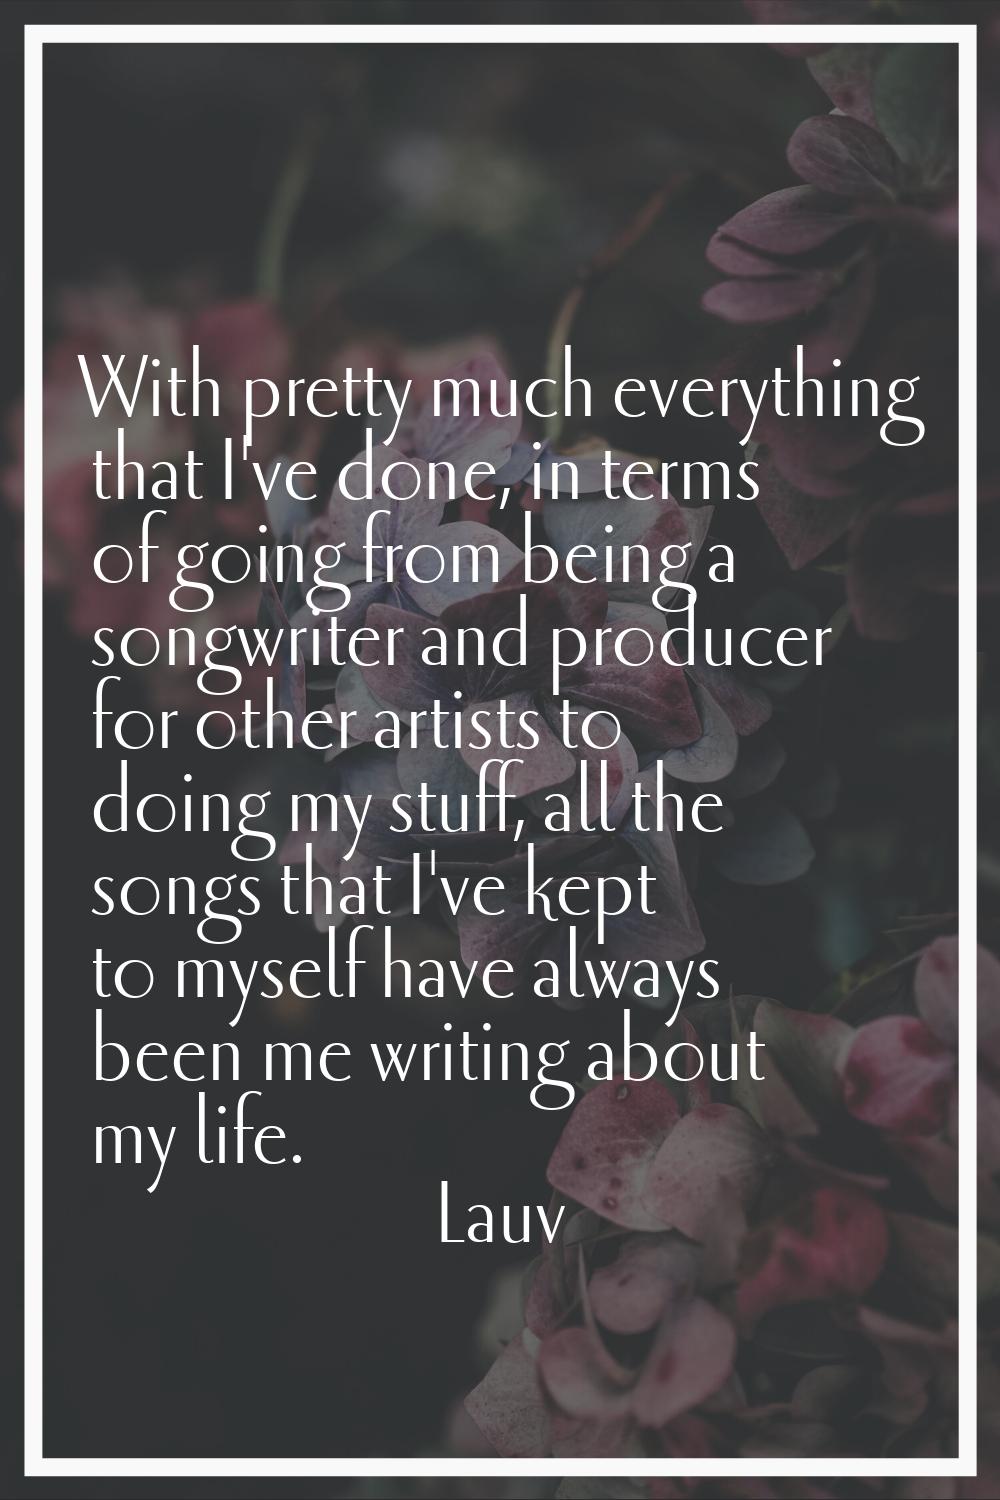 With pretty much everything that I've done, in terms of going from being a songwriter and producer 